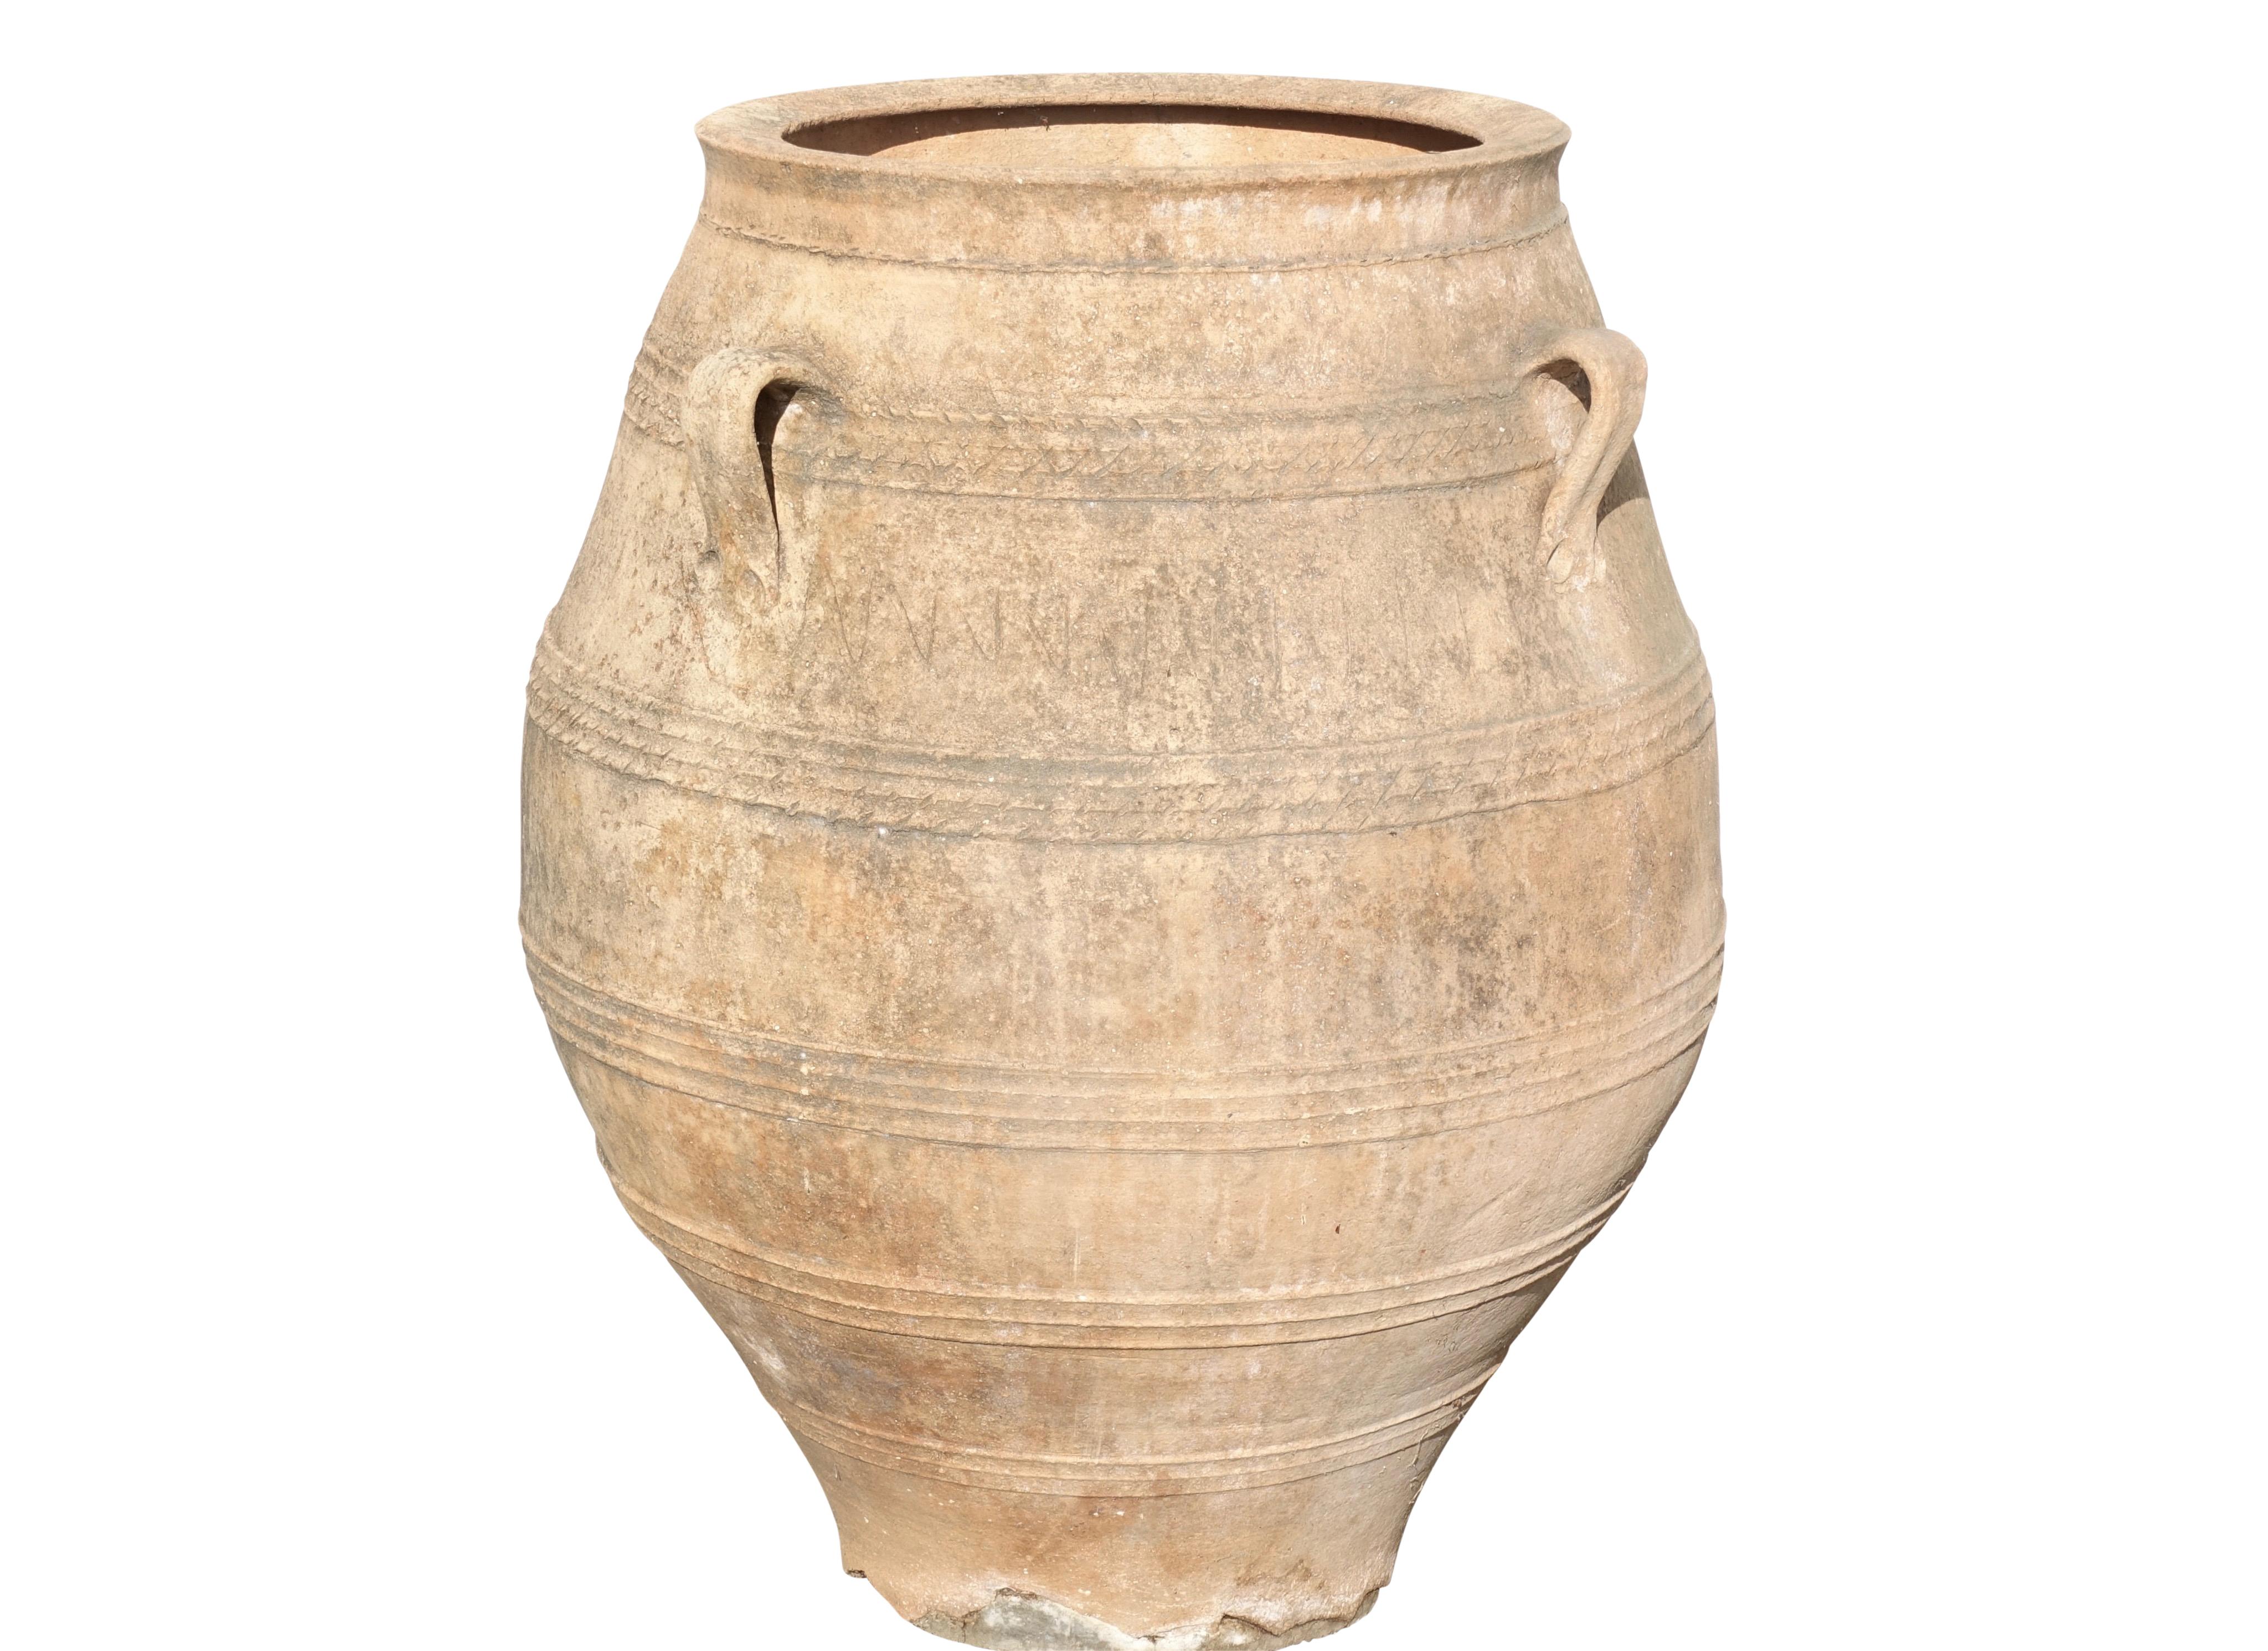 A large terracotta oil jar of ovoid shape with bands of ribbing and three loop handles. Some restoration to the base of the jar. Italian, 19th century.